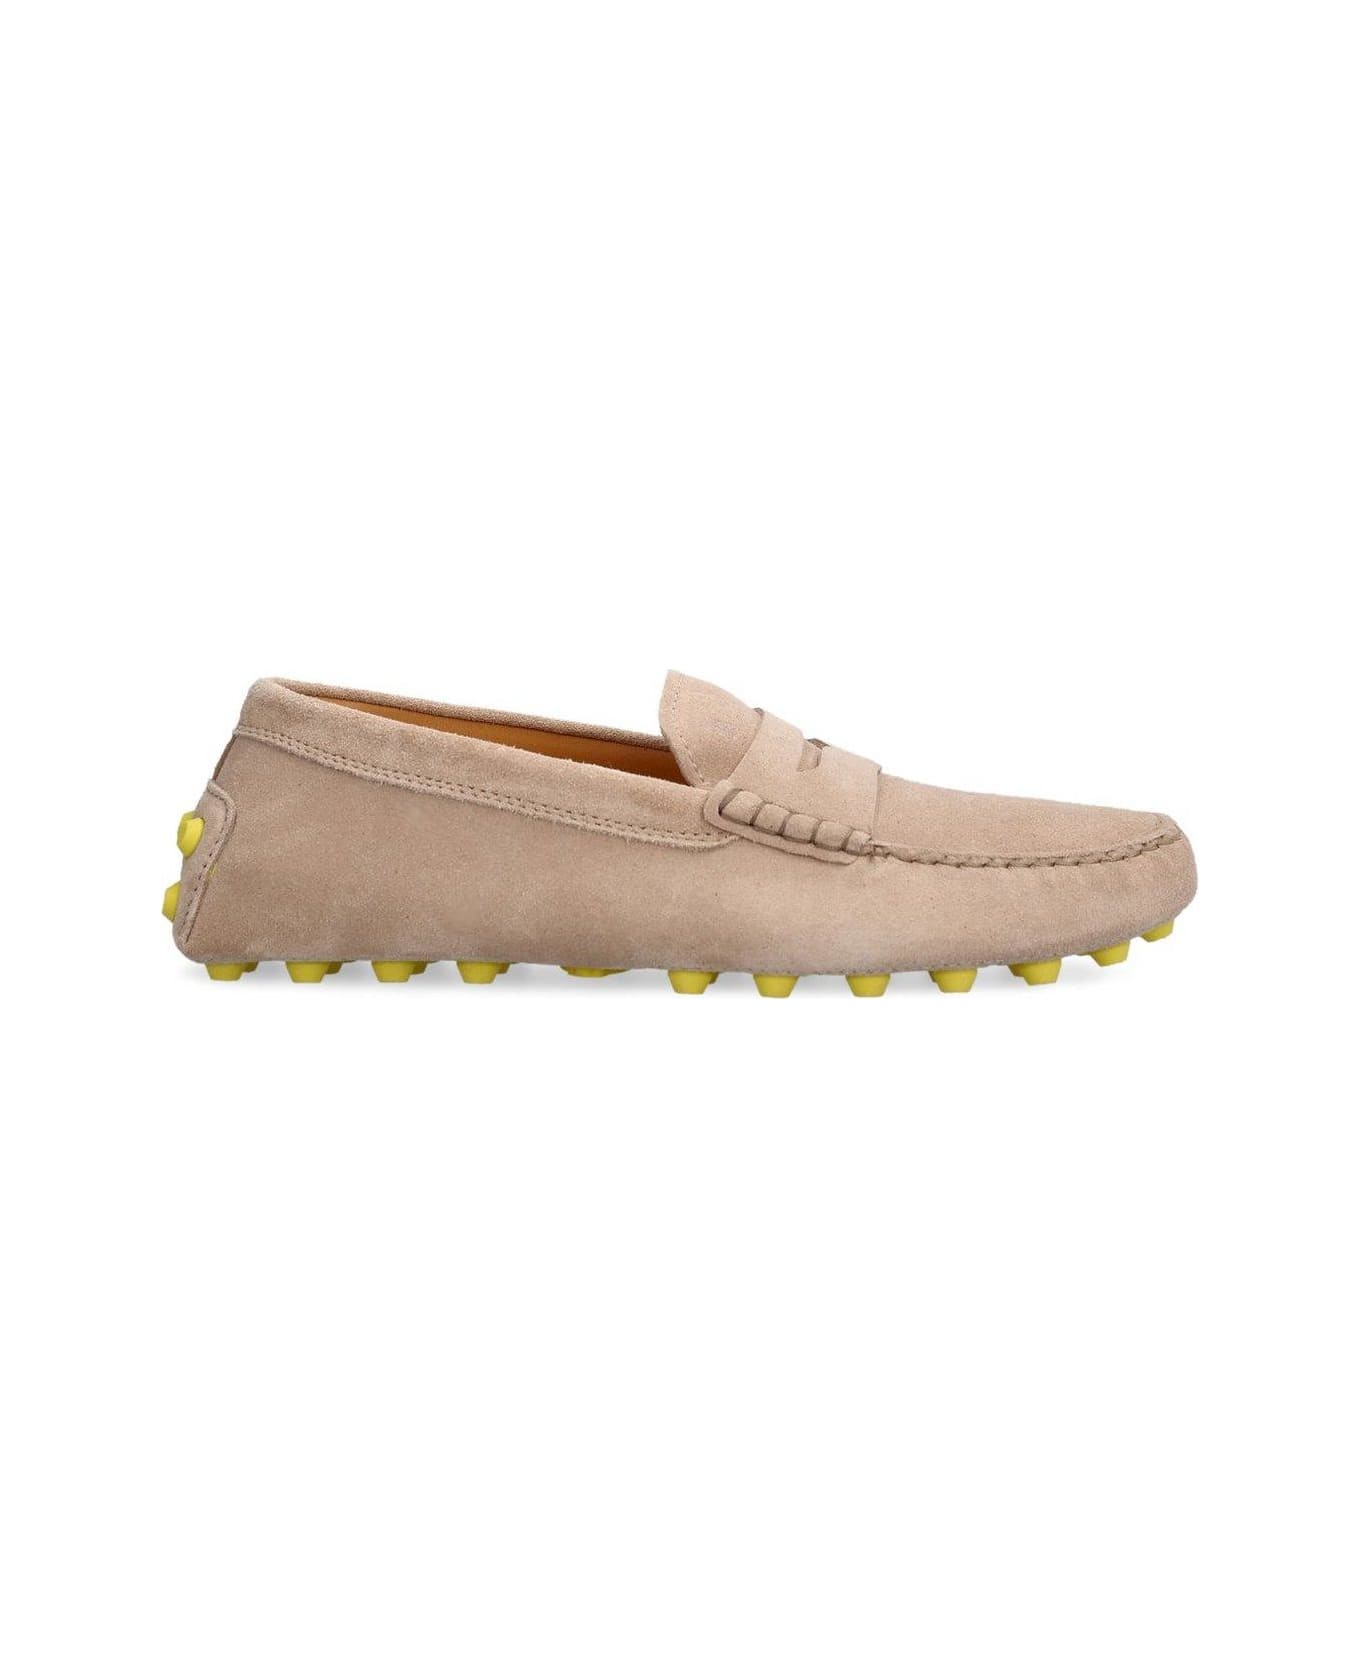 Tod's Gommino Slip-on Driving 31Q4954J Shoes - Cipria